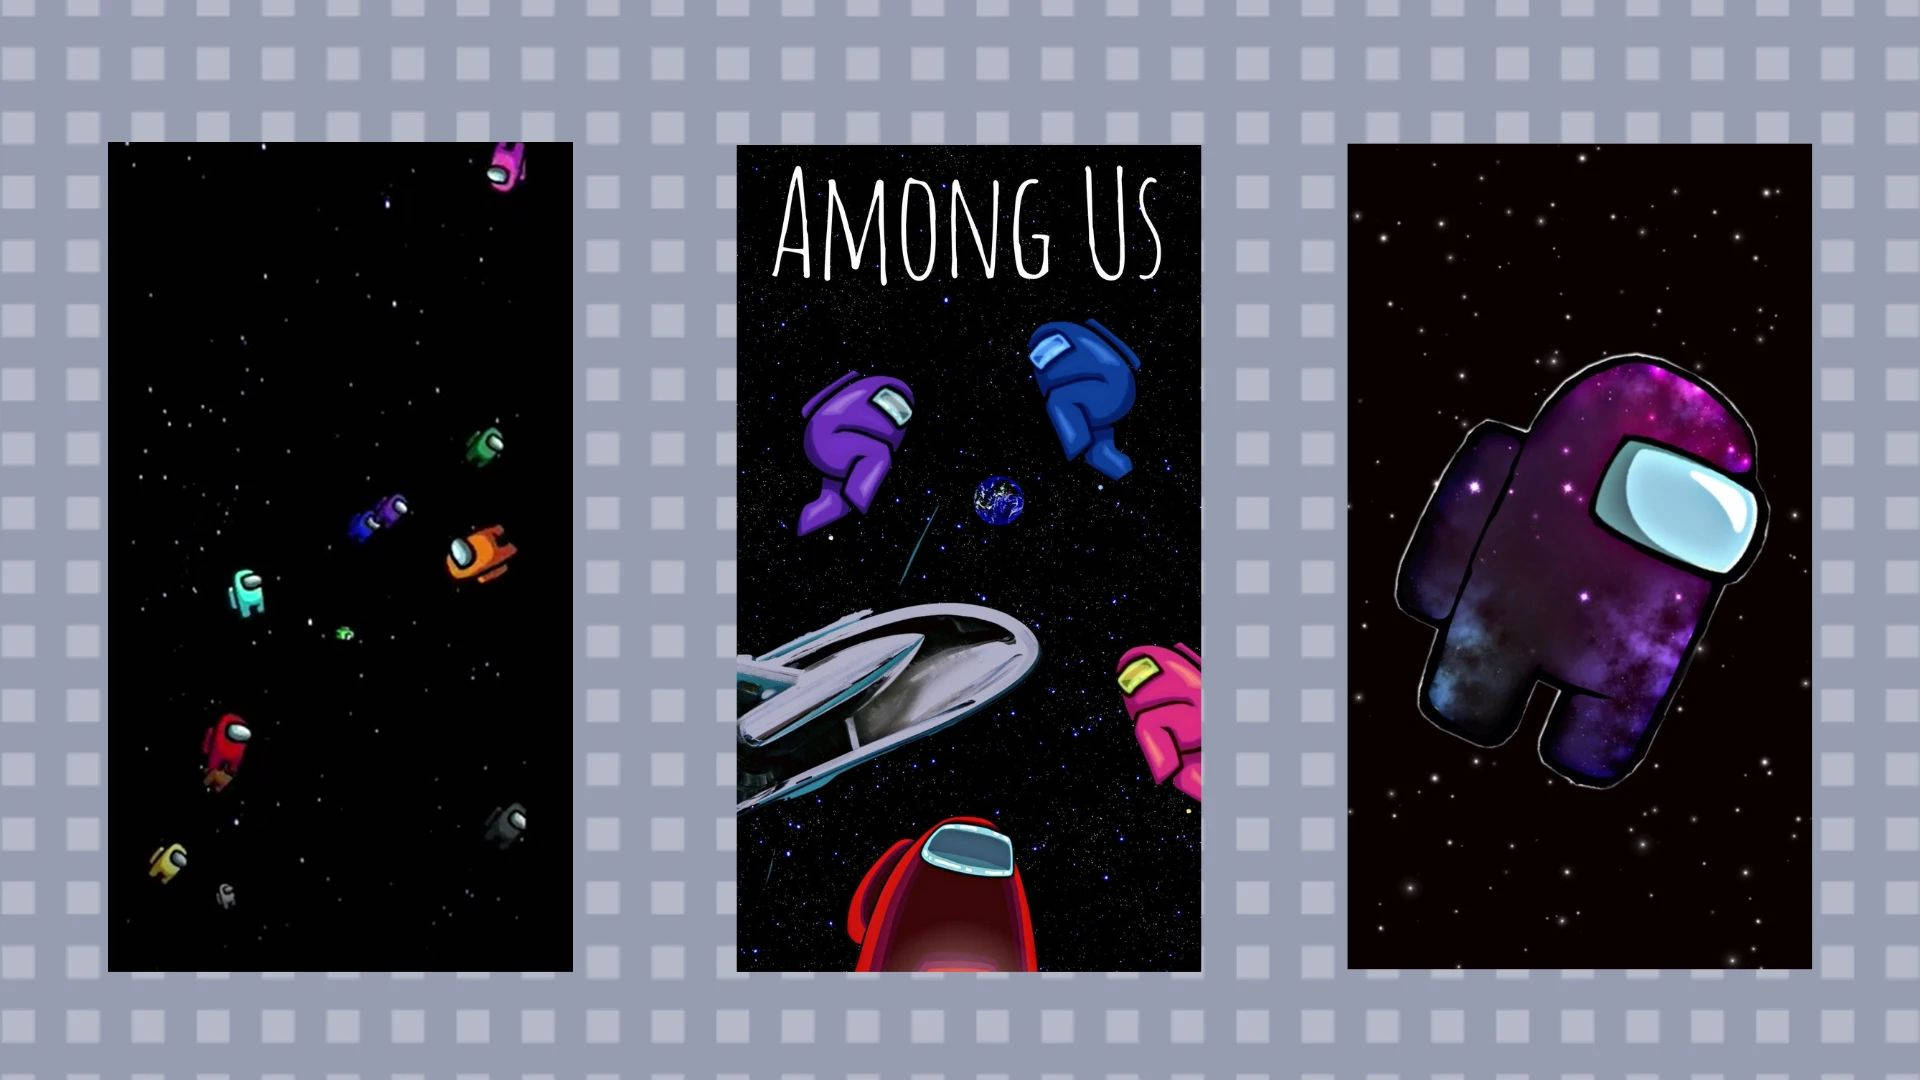 Among Us Game In Space